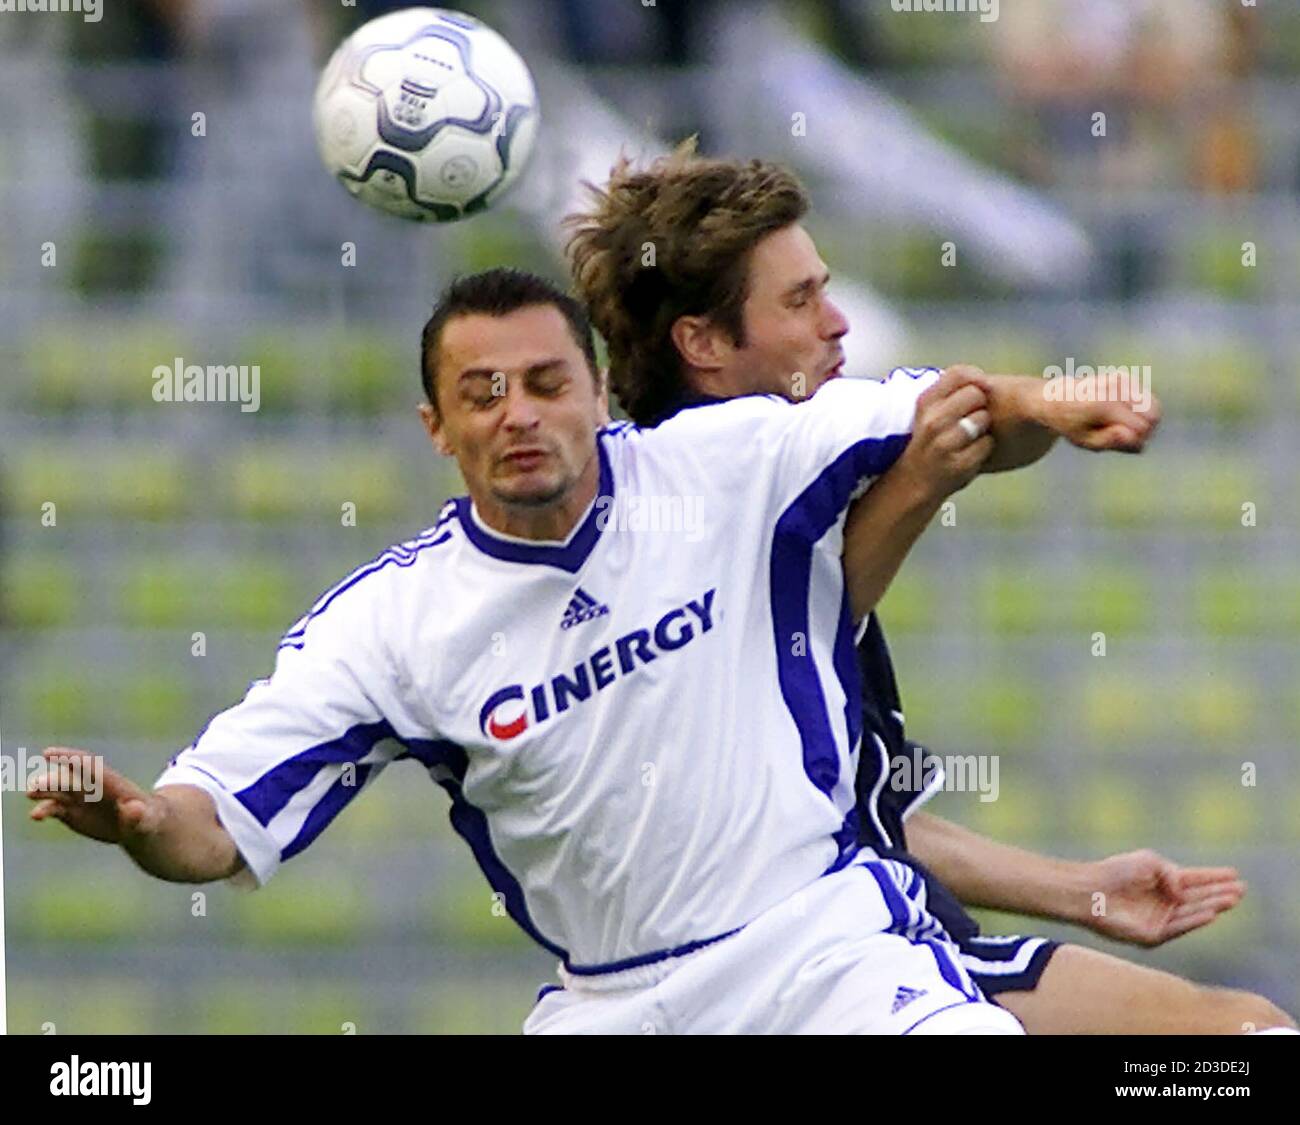 Harald Cerny (R) of TSV 1860 Munich is challenged by Vladimir Kinder of FK Drnovice during the first half of their Uefa Cup soccer match in Munich's Olympic stadium, September 26, 2000.  MAD Stock Photo